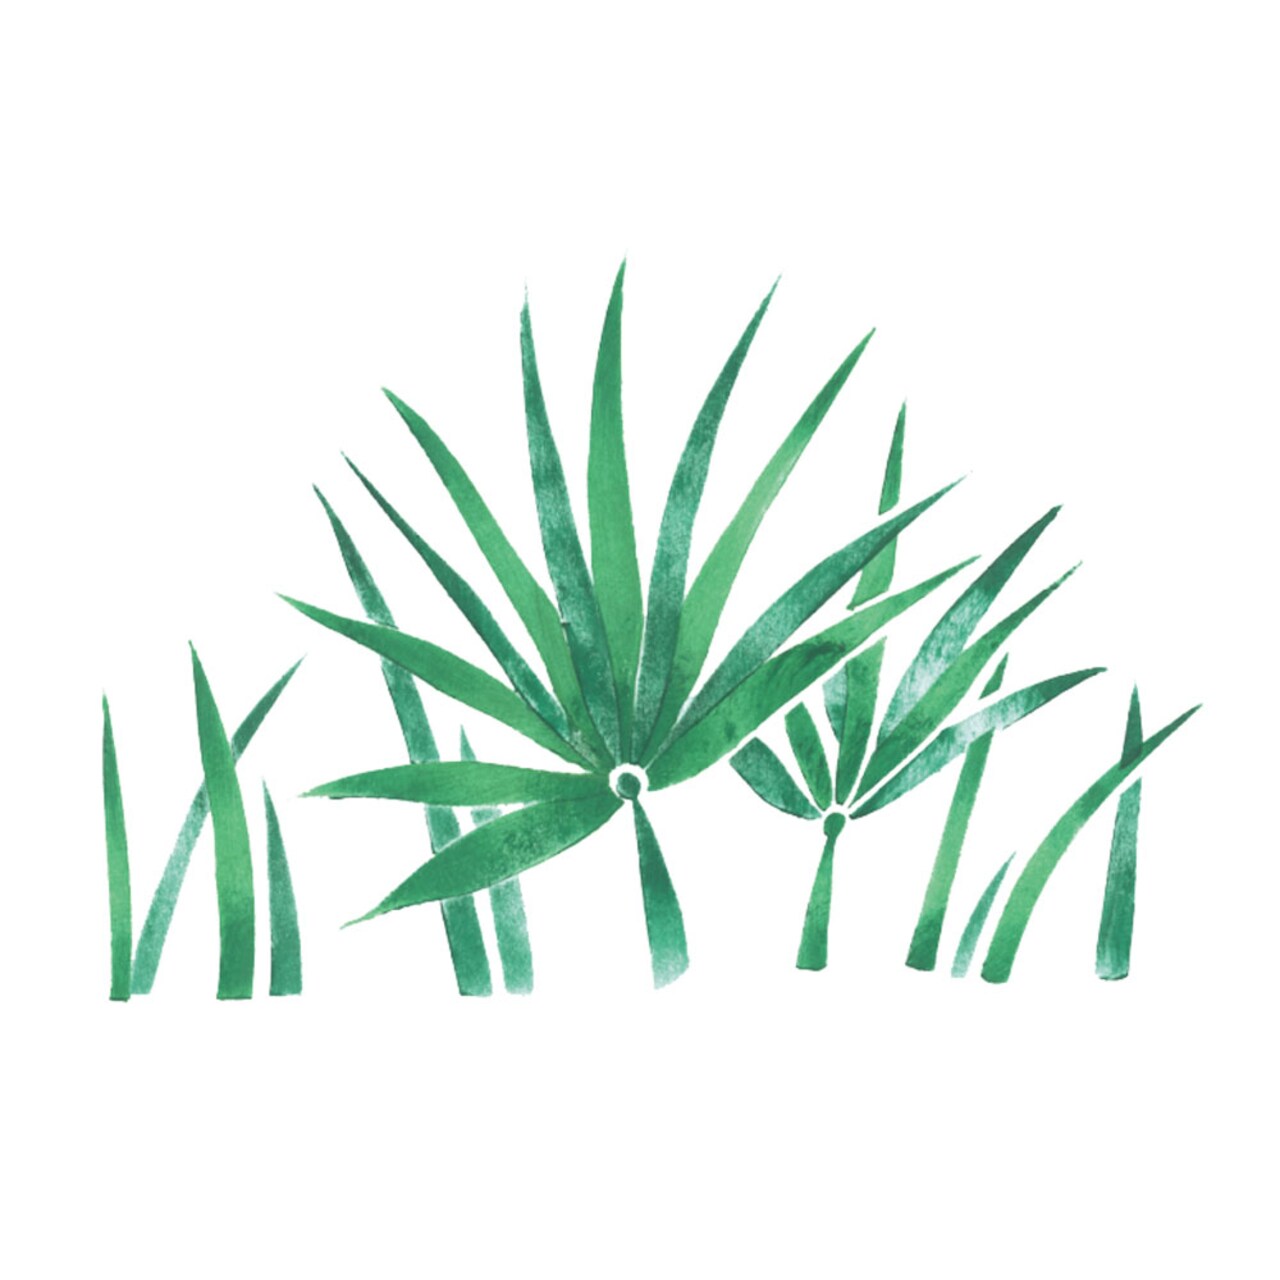 Large Jungle Grass Wall Stencil | 2854B by Designer Stencils | Outdoor Stencils | Reusable Art Craft Stencils for Painting on Walls, Canvas, Wood | Reusable Plastic Paint Stencil for Home Makeover | Easy to Use &#x26; Clean Art Stencil